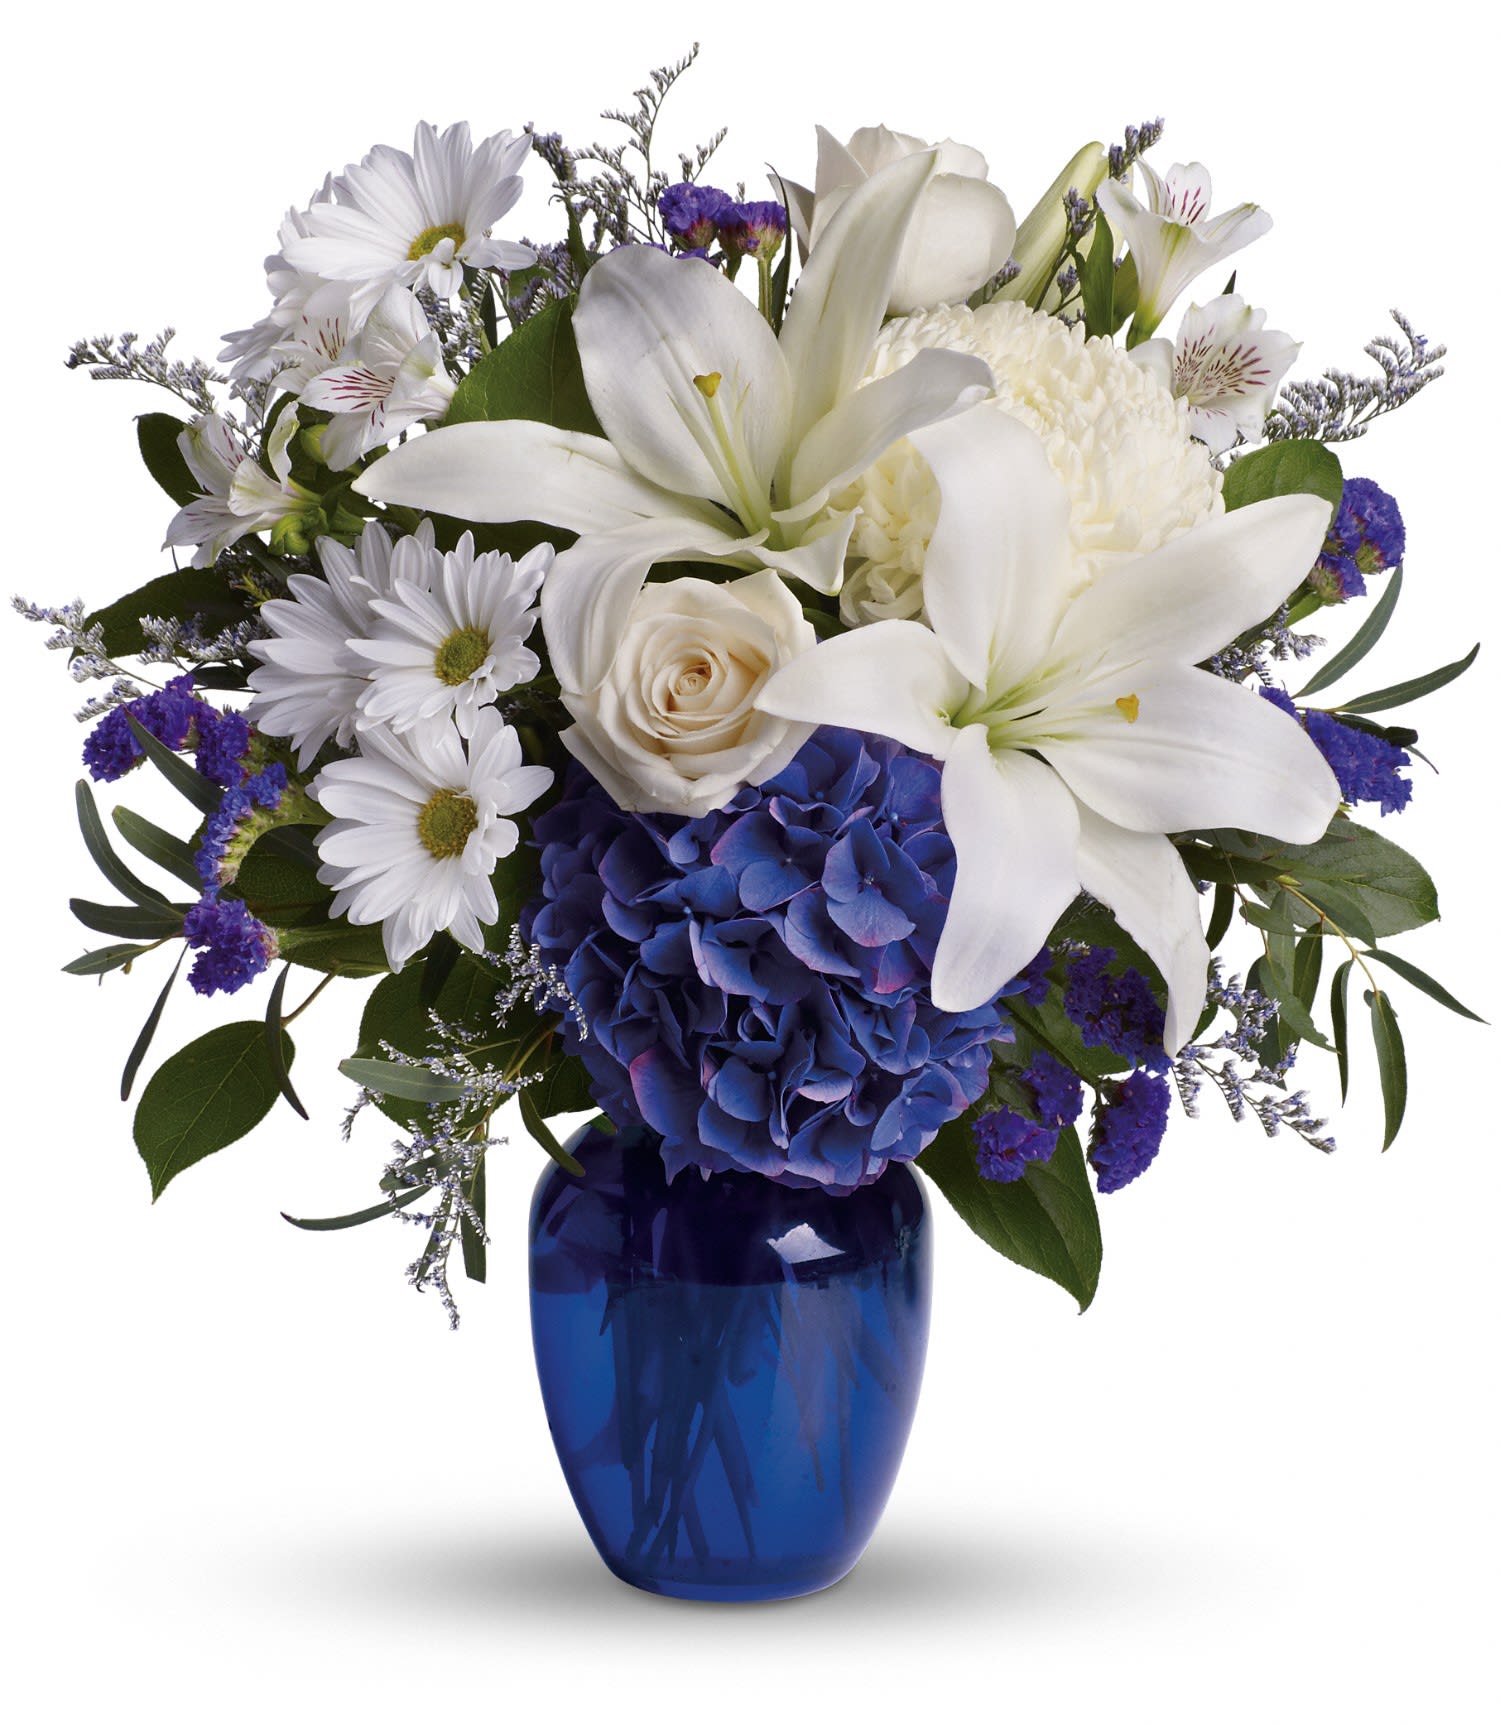 Beautiful in Blue - Beautiful blooms such as blue hydrangea, crÃ¨me roses, white lilies and alstroemeria along with yellow and white chrysanthemums, eucalyptus, limonium and more are beautifully arranged in a dazzling cobalt blue vase. Approximately 16 1/2&quot; W x 18&quot; H